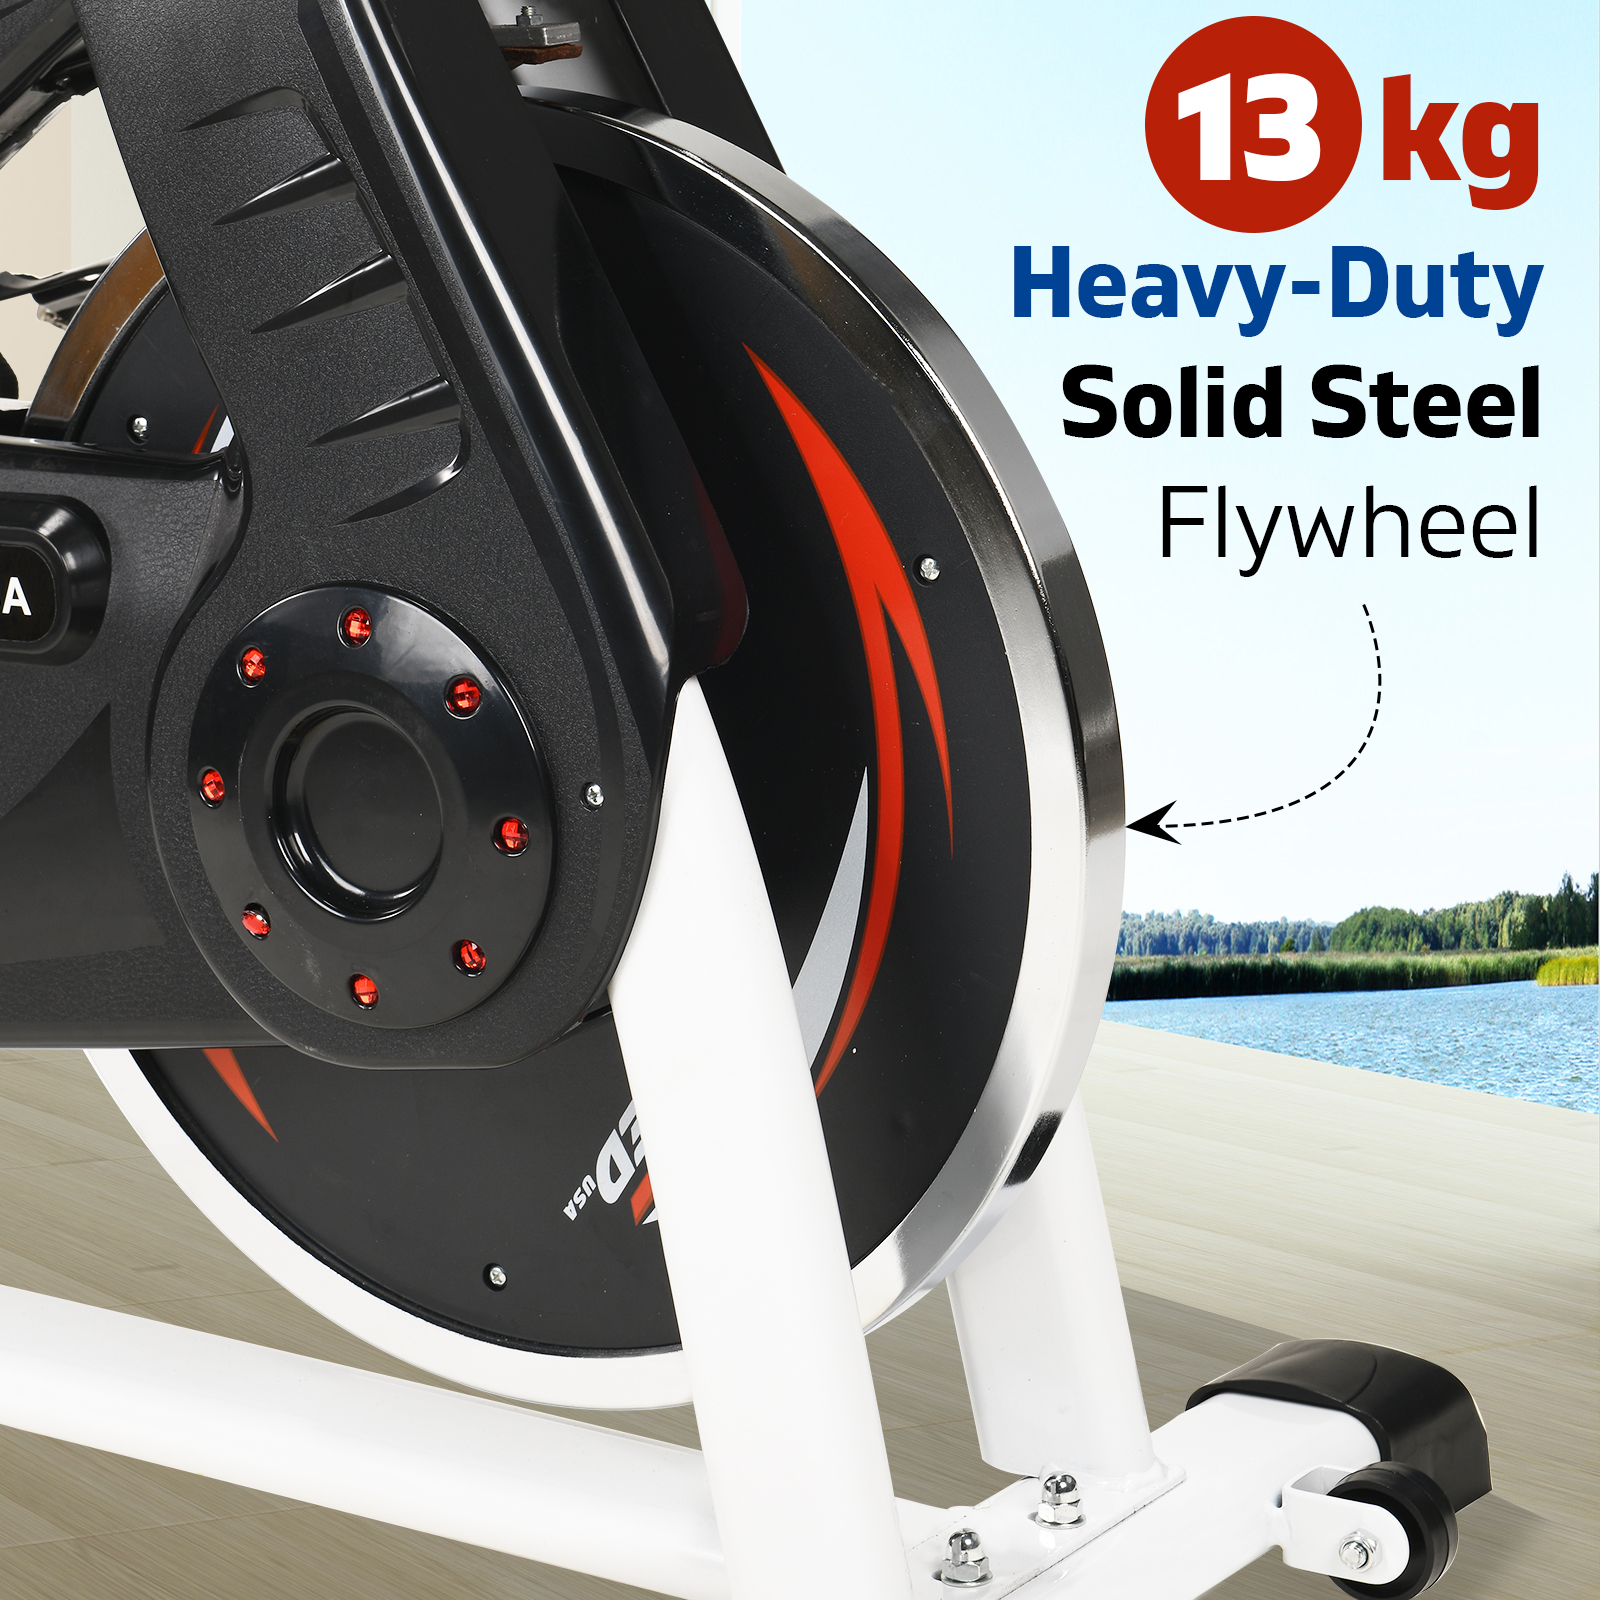 NORFLX Spin Bike Flywheel Commercial Gym Exercise Home Workout Bike Fitness White